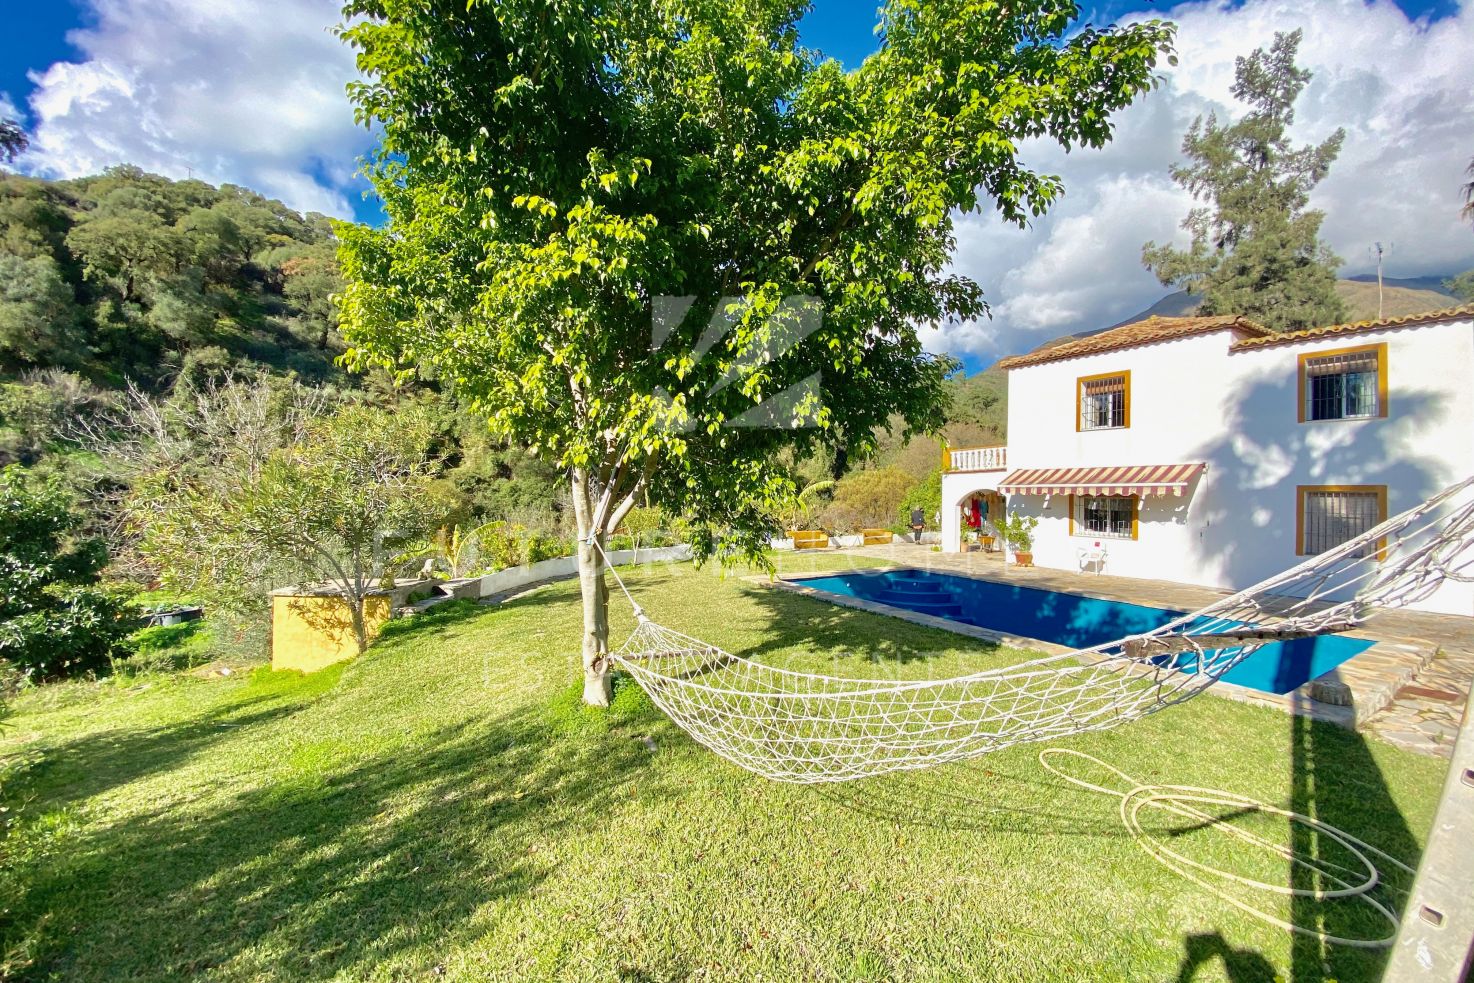 Beautiful country finca in the picturesque Casares valley